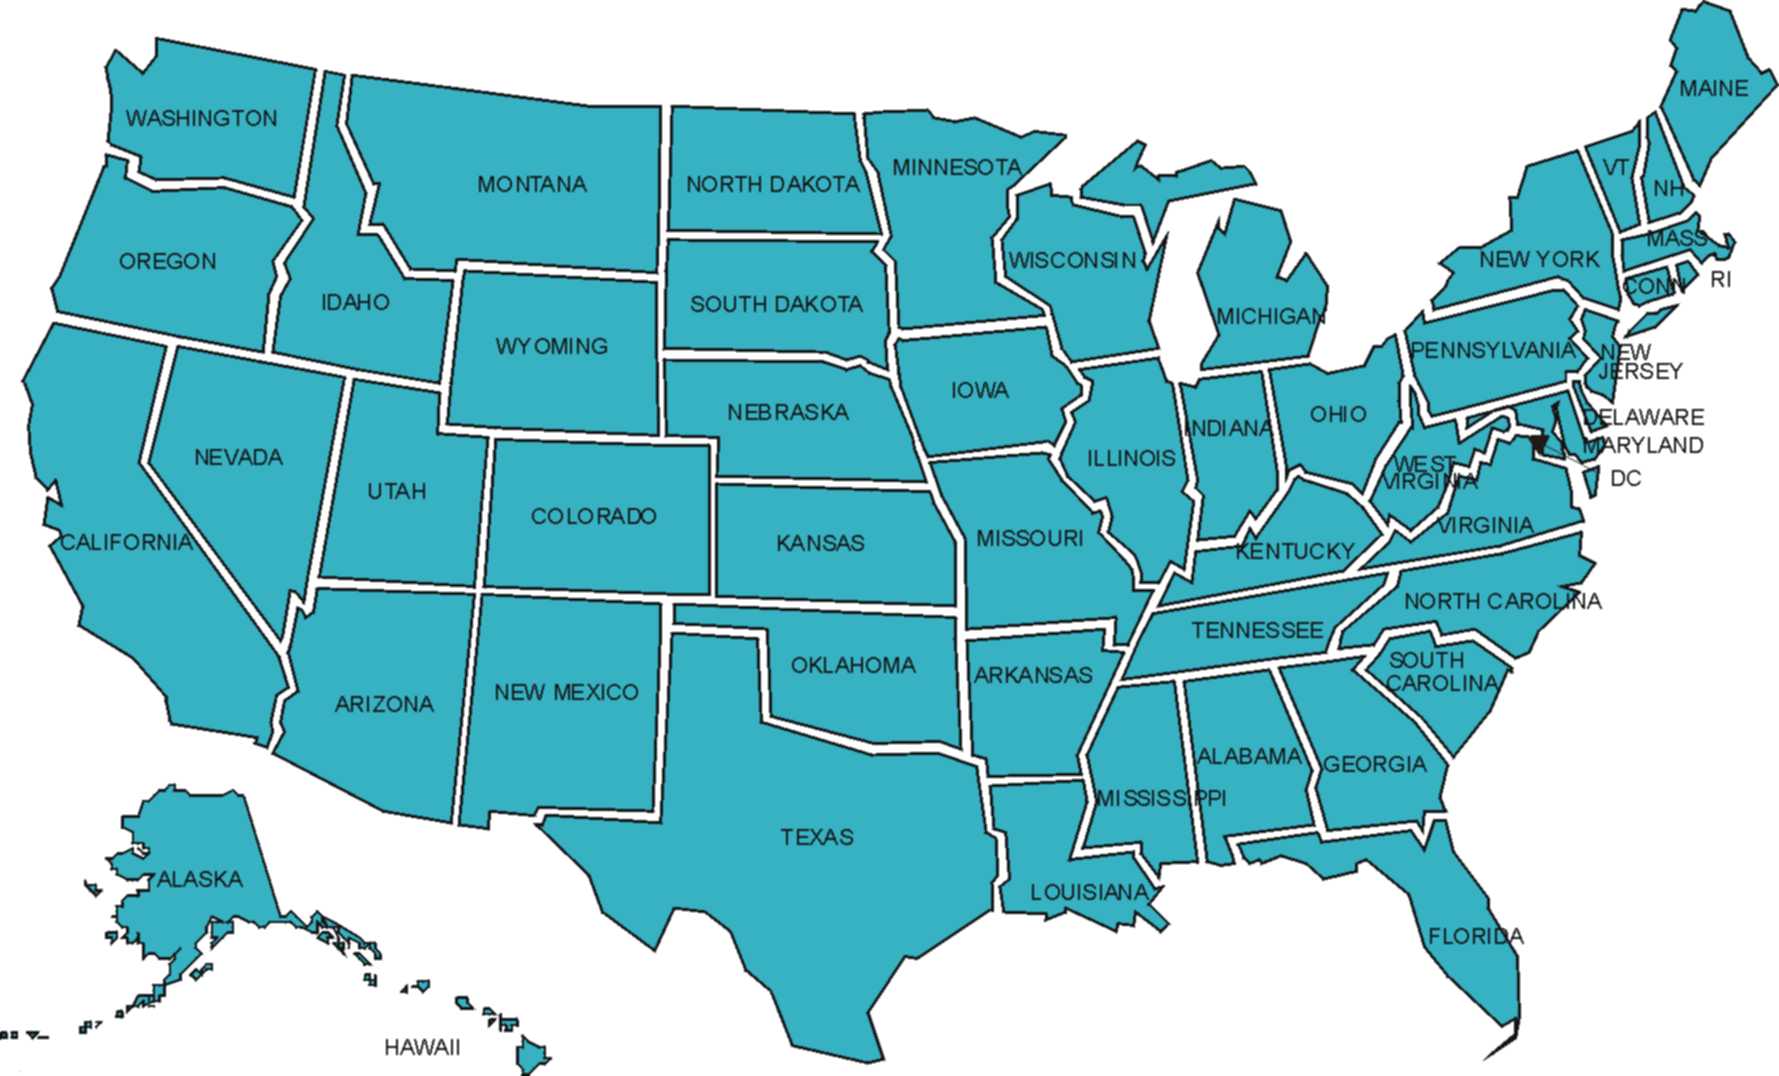 7 Best Images Of Printable Of USA States Shapes Map With State Names 